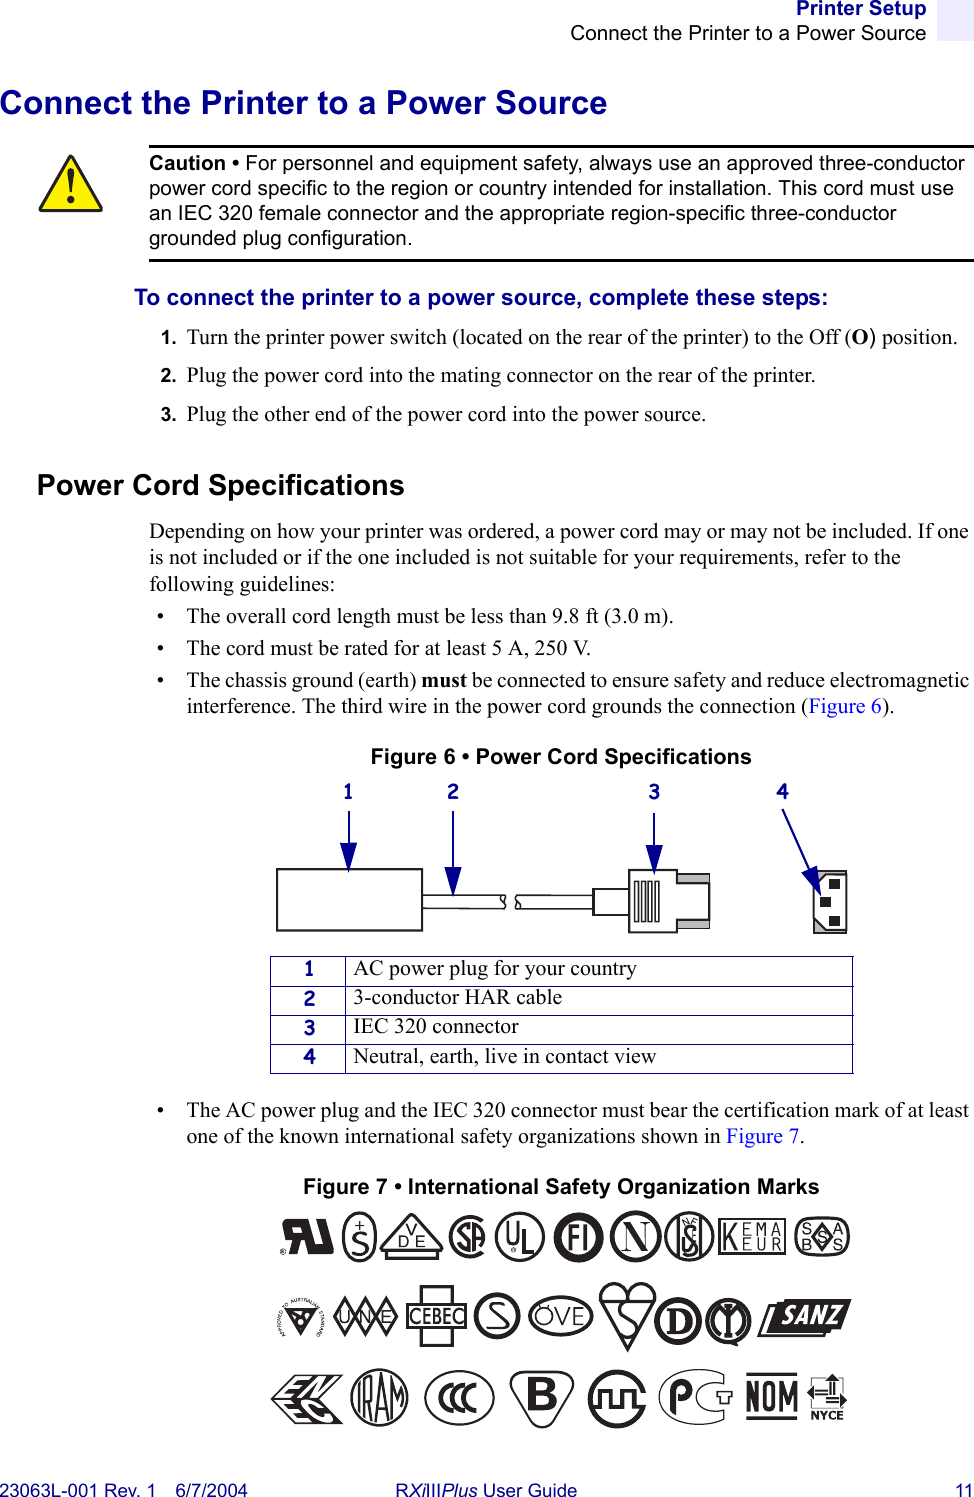 Printer SetupConnect the Printer to a Power Source23063L-001 Rev. 1 6/7/2004 RXiIIIPlus User Guide 11Connect the Printer to a Power SourceTo connect the printer to a power source, complete these steps:1. Turn the printer power switch (located on the rear of the printer) to the Off (O) position.2. Plug the power cord into the mating connector on the rear of the printer.3. Plug the other end of the power cord into the power source.Power Cord SpecificationsDepending on how your printer was ordered, a power cord may or may not be included. If one is not included or if the one included is not suitable for your requirements, refer to the following guidelines:• The overall cord length must be less than 9.8 ft (3.0 m).• The cord must be rated for at least 5 A, 250 V.• The chassis ground (earth) must be connected to ensure safety and reduce electromagnetic interference. The third wire in the power cord grounds the connection (Figure 6).Figure 6 • Power Cord Specifications• The AC power plug and the IEC 320 connector must bear the certification mark of at least one of the known international safety organizations shown in Figure 7.Figure 7 • International Safety Organization MarksCaution • For personnel and equipment safety, always use an approved three-conductor power cord specific to the region or country intended for installation. This cord must use an IEC 320 female connector and the appropriate region-specific three-conductor grounded plug configuration.1AC power plug for your country23-conductor HAR cable3IEC 320 connector4Neutral, earth, live in contact view1 2 3 4+R